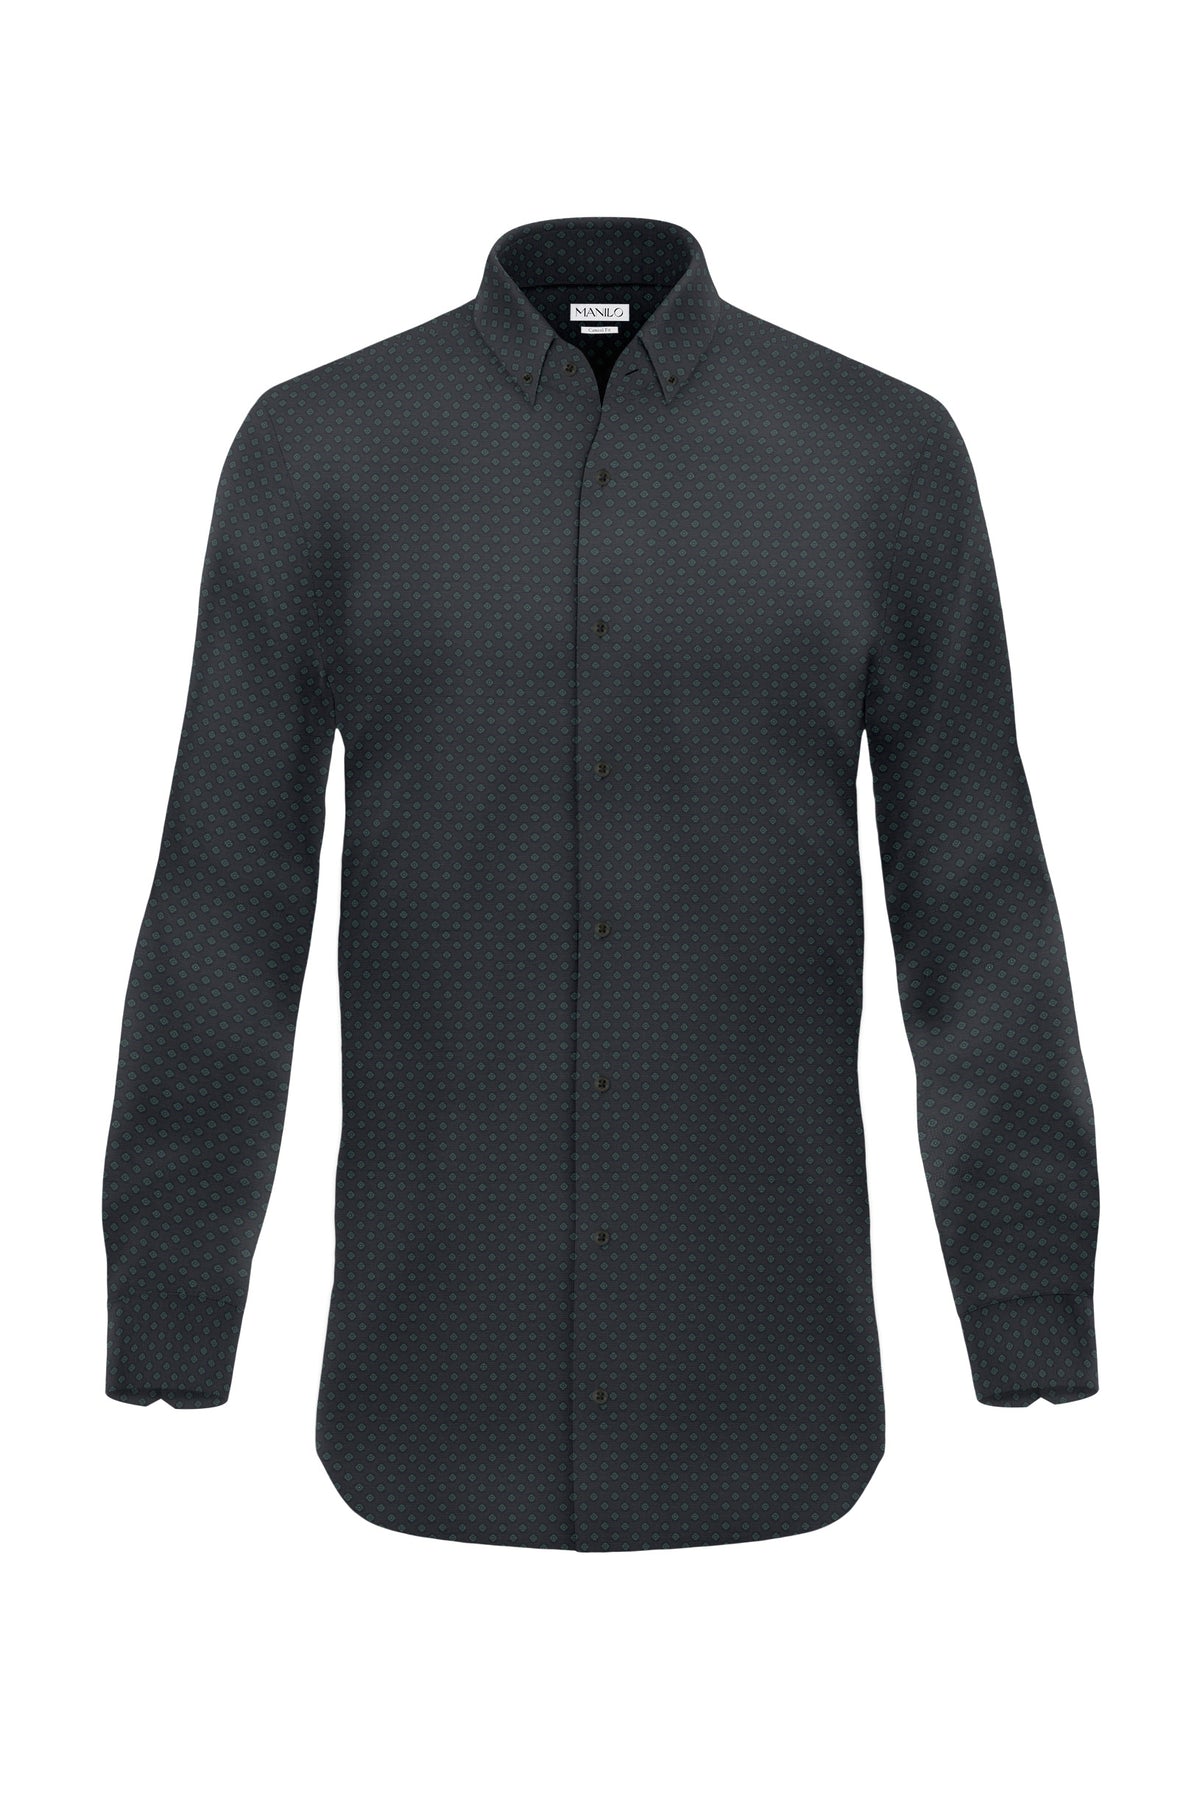 Printed casual shirt with graphic pattern in dark green (Art. 2111-C)